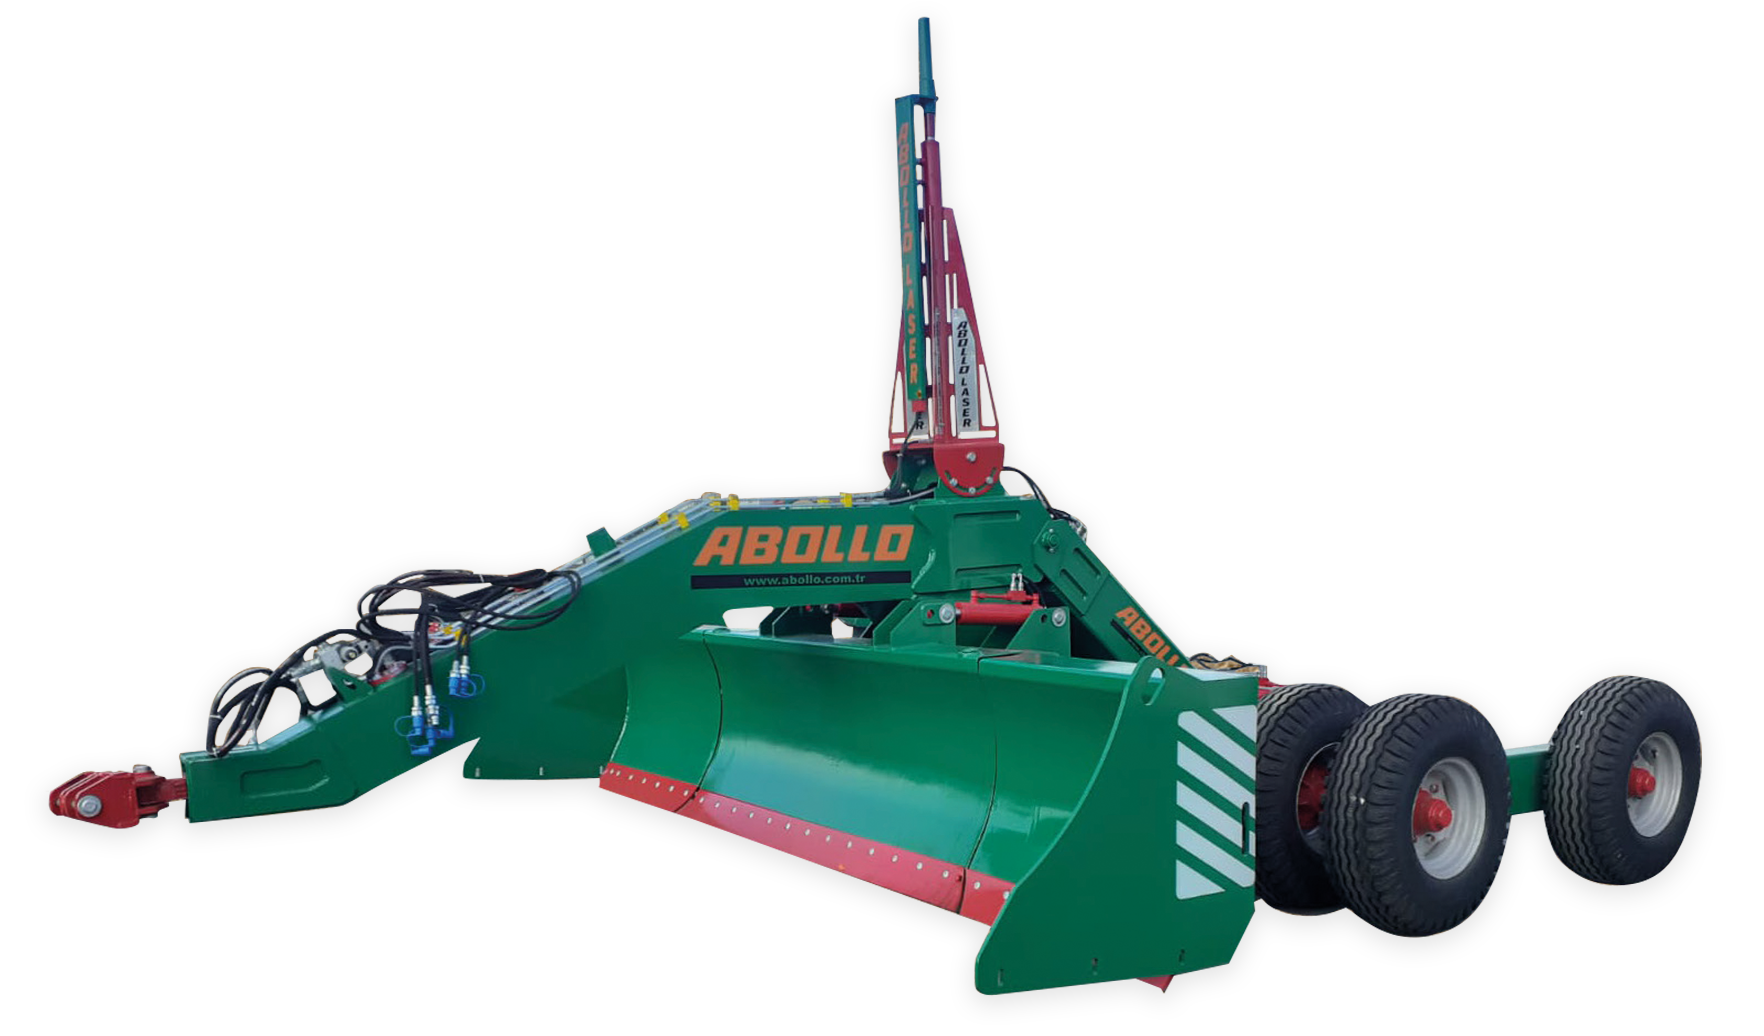 LASER LEVELLER | Abollo Agricultural Machinery